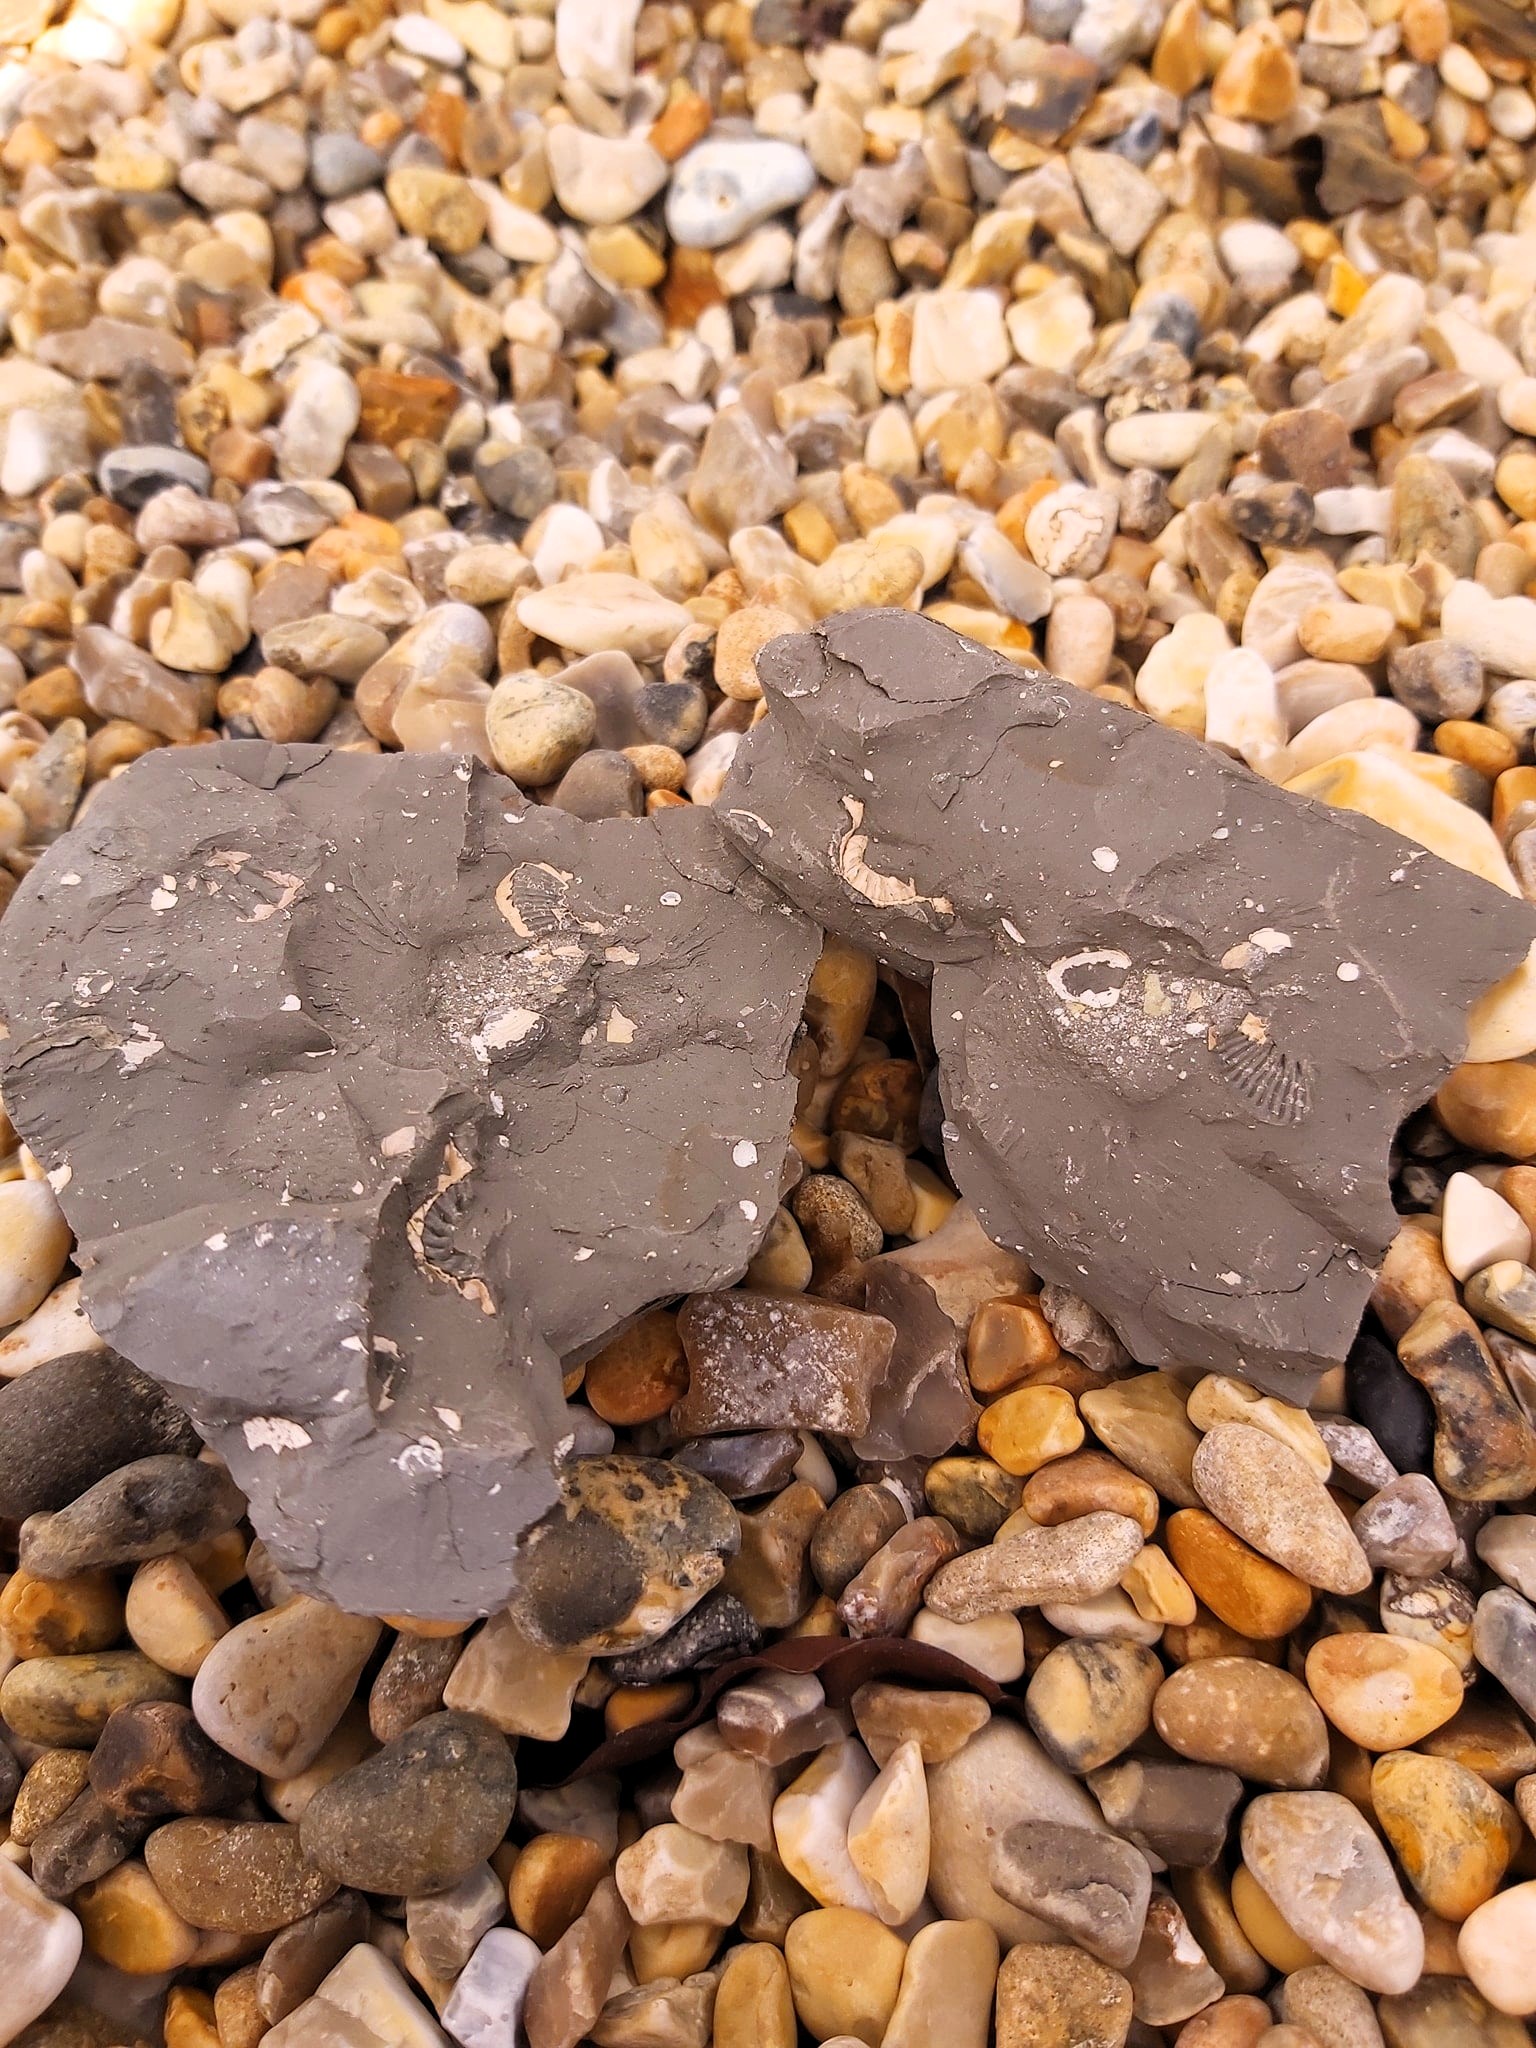 A rock cracked in half, revealing fossils inside. Found on Ringstead beach, Dorset, England